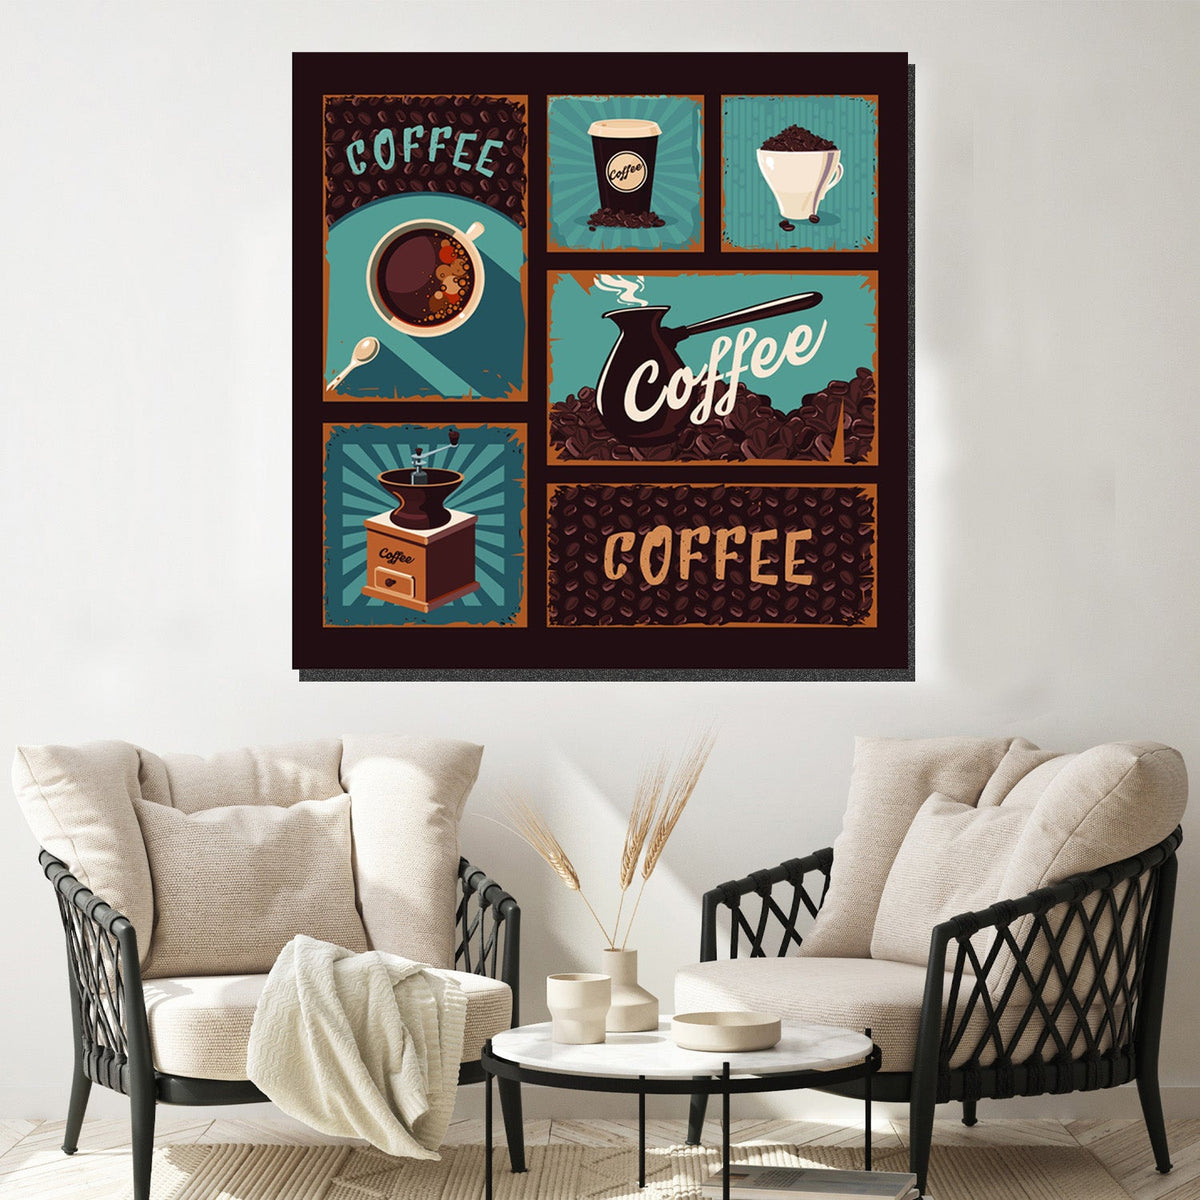 https://cdn.shopify.com/s/files/1/0387/9986/8044/products/CoffeeshopPosterCanvasArtprintStretched-4.jpg